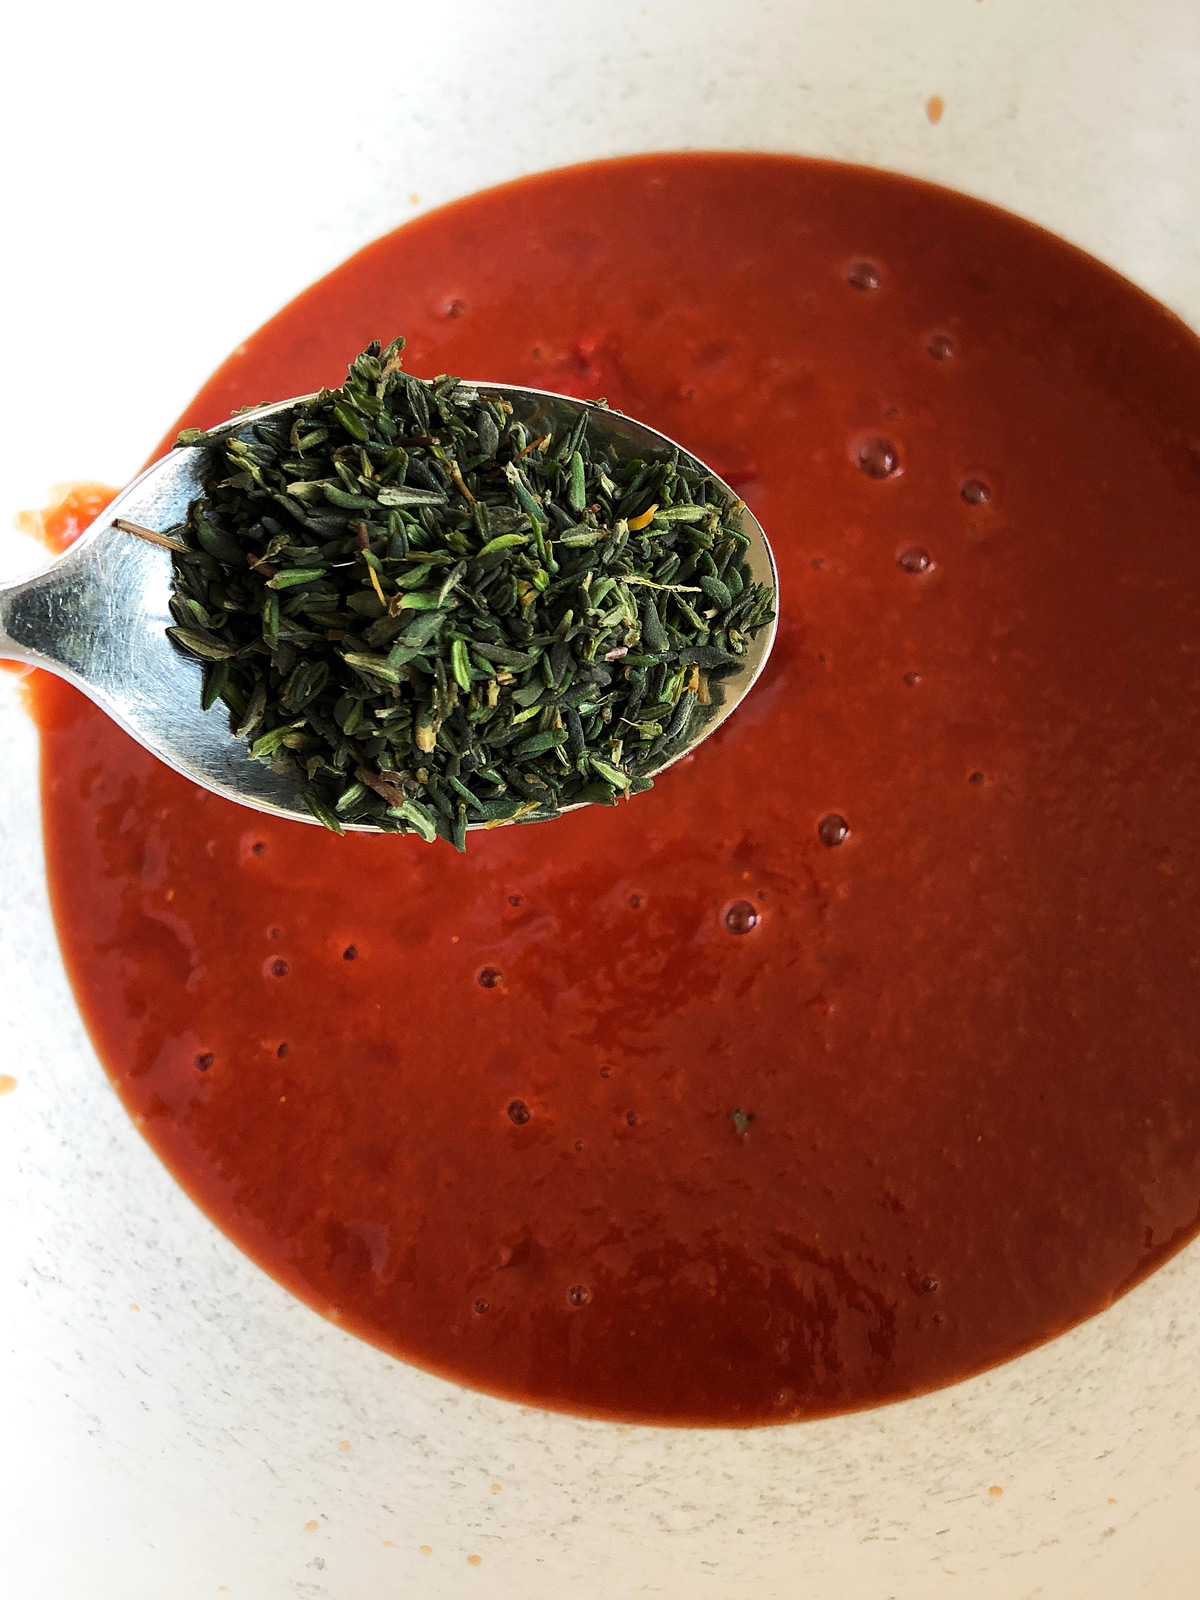 Fresh thyme leaves on a spoon with red passata in the background.